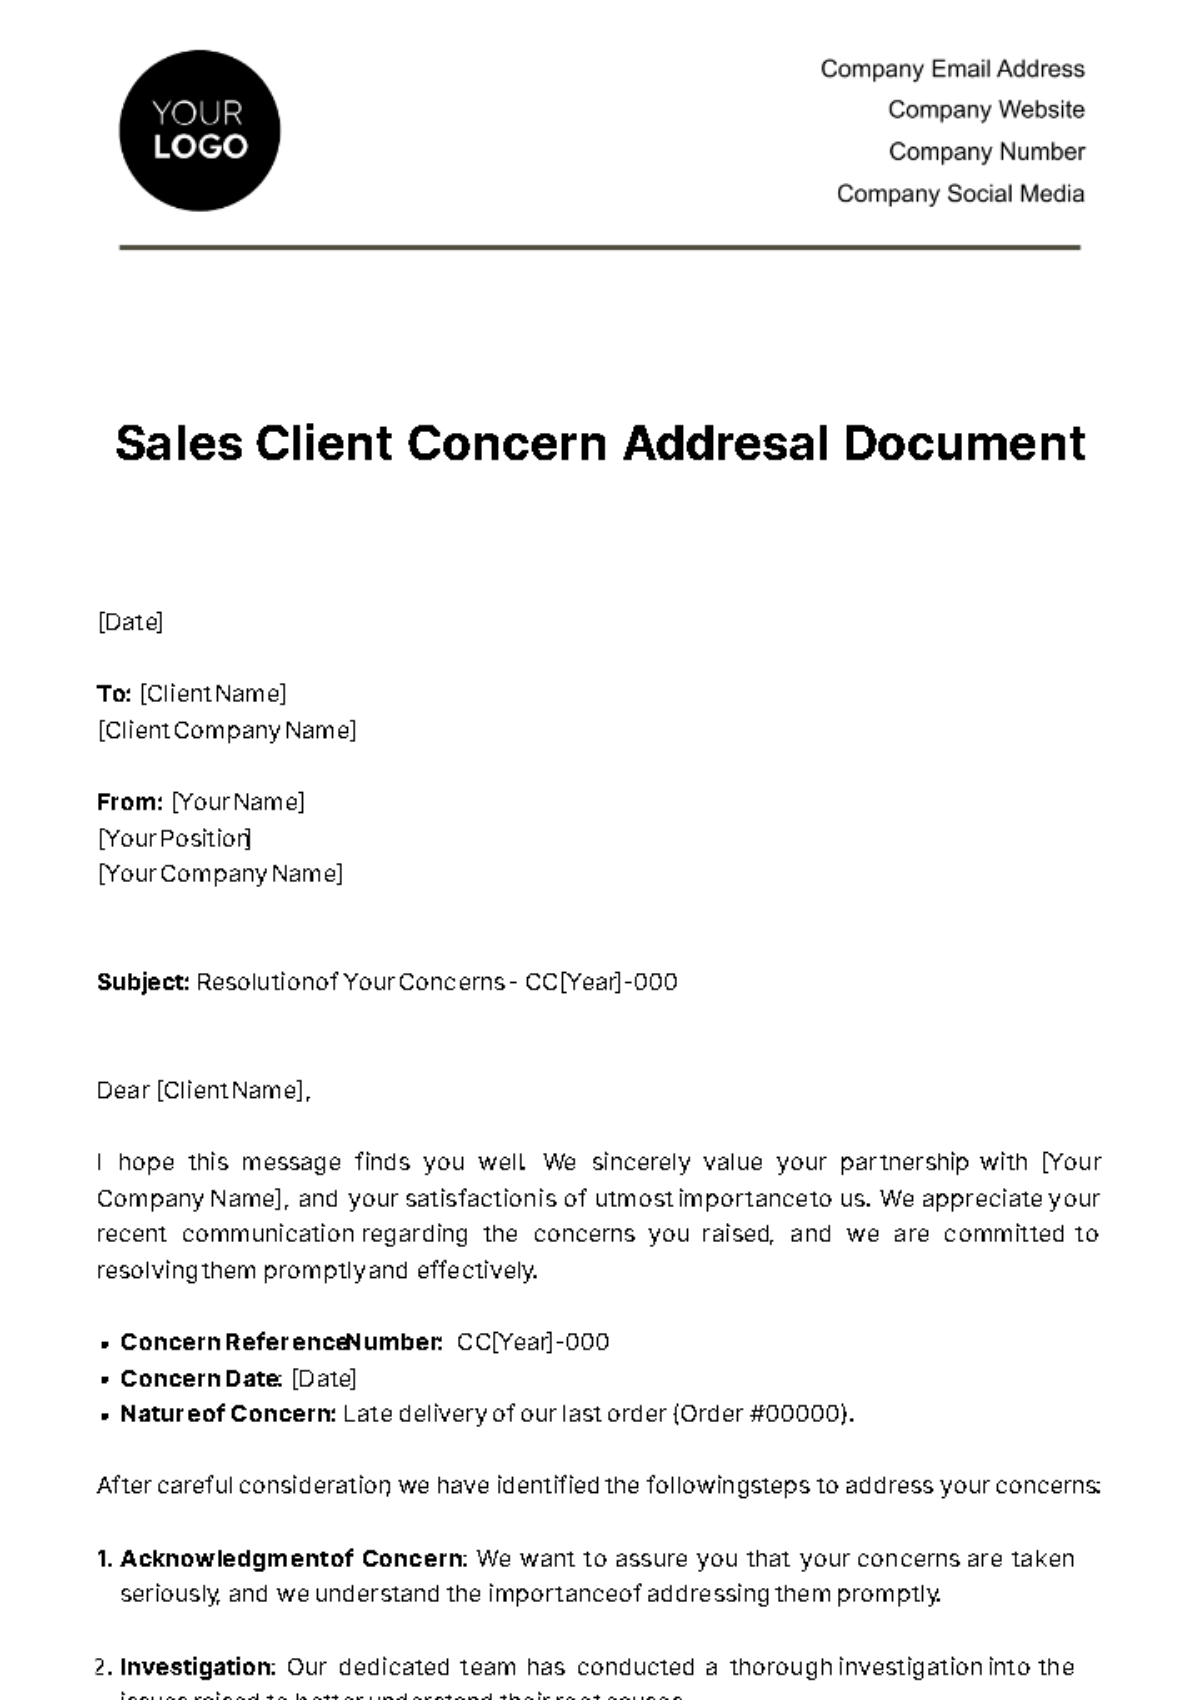 Free Sales Client Concern Addressal Document Template